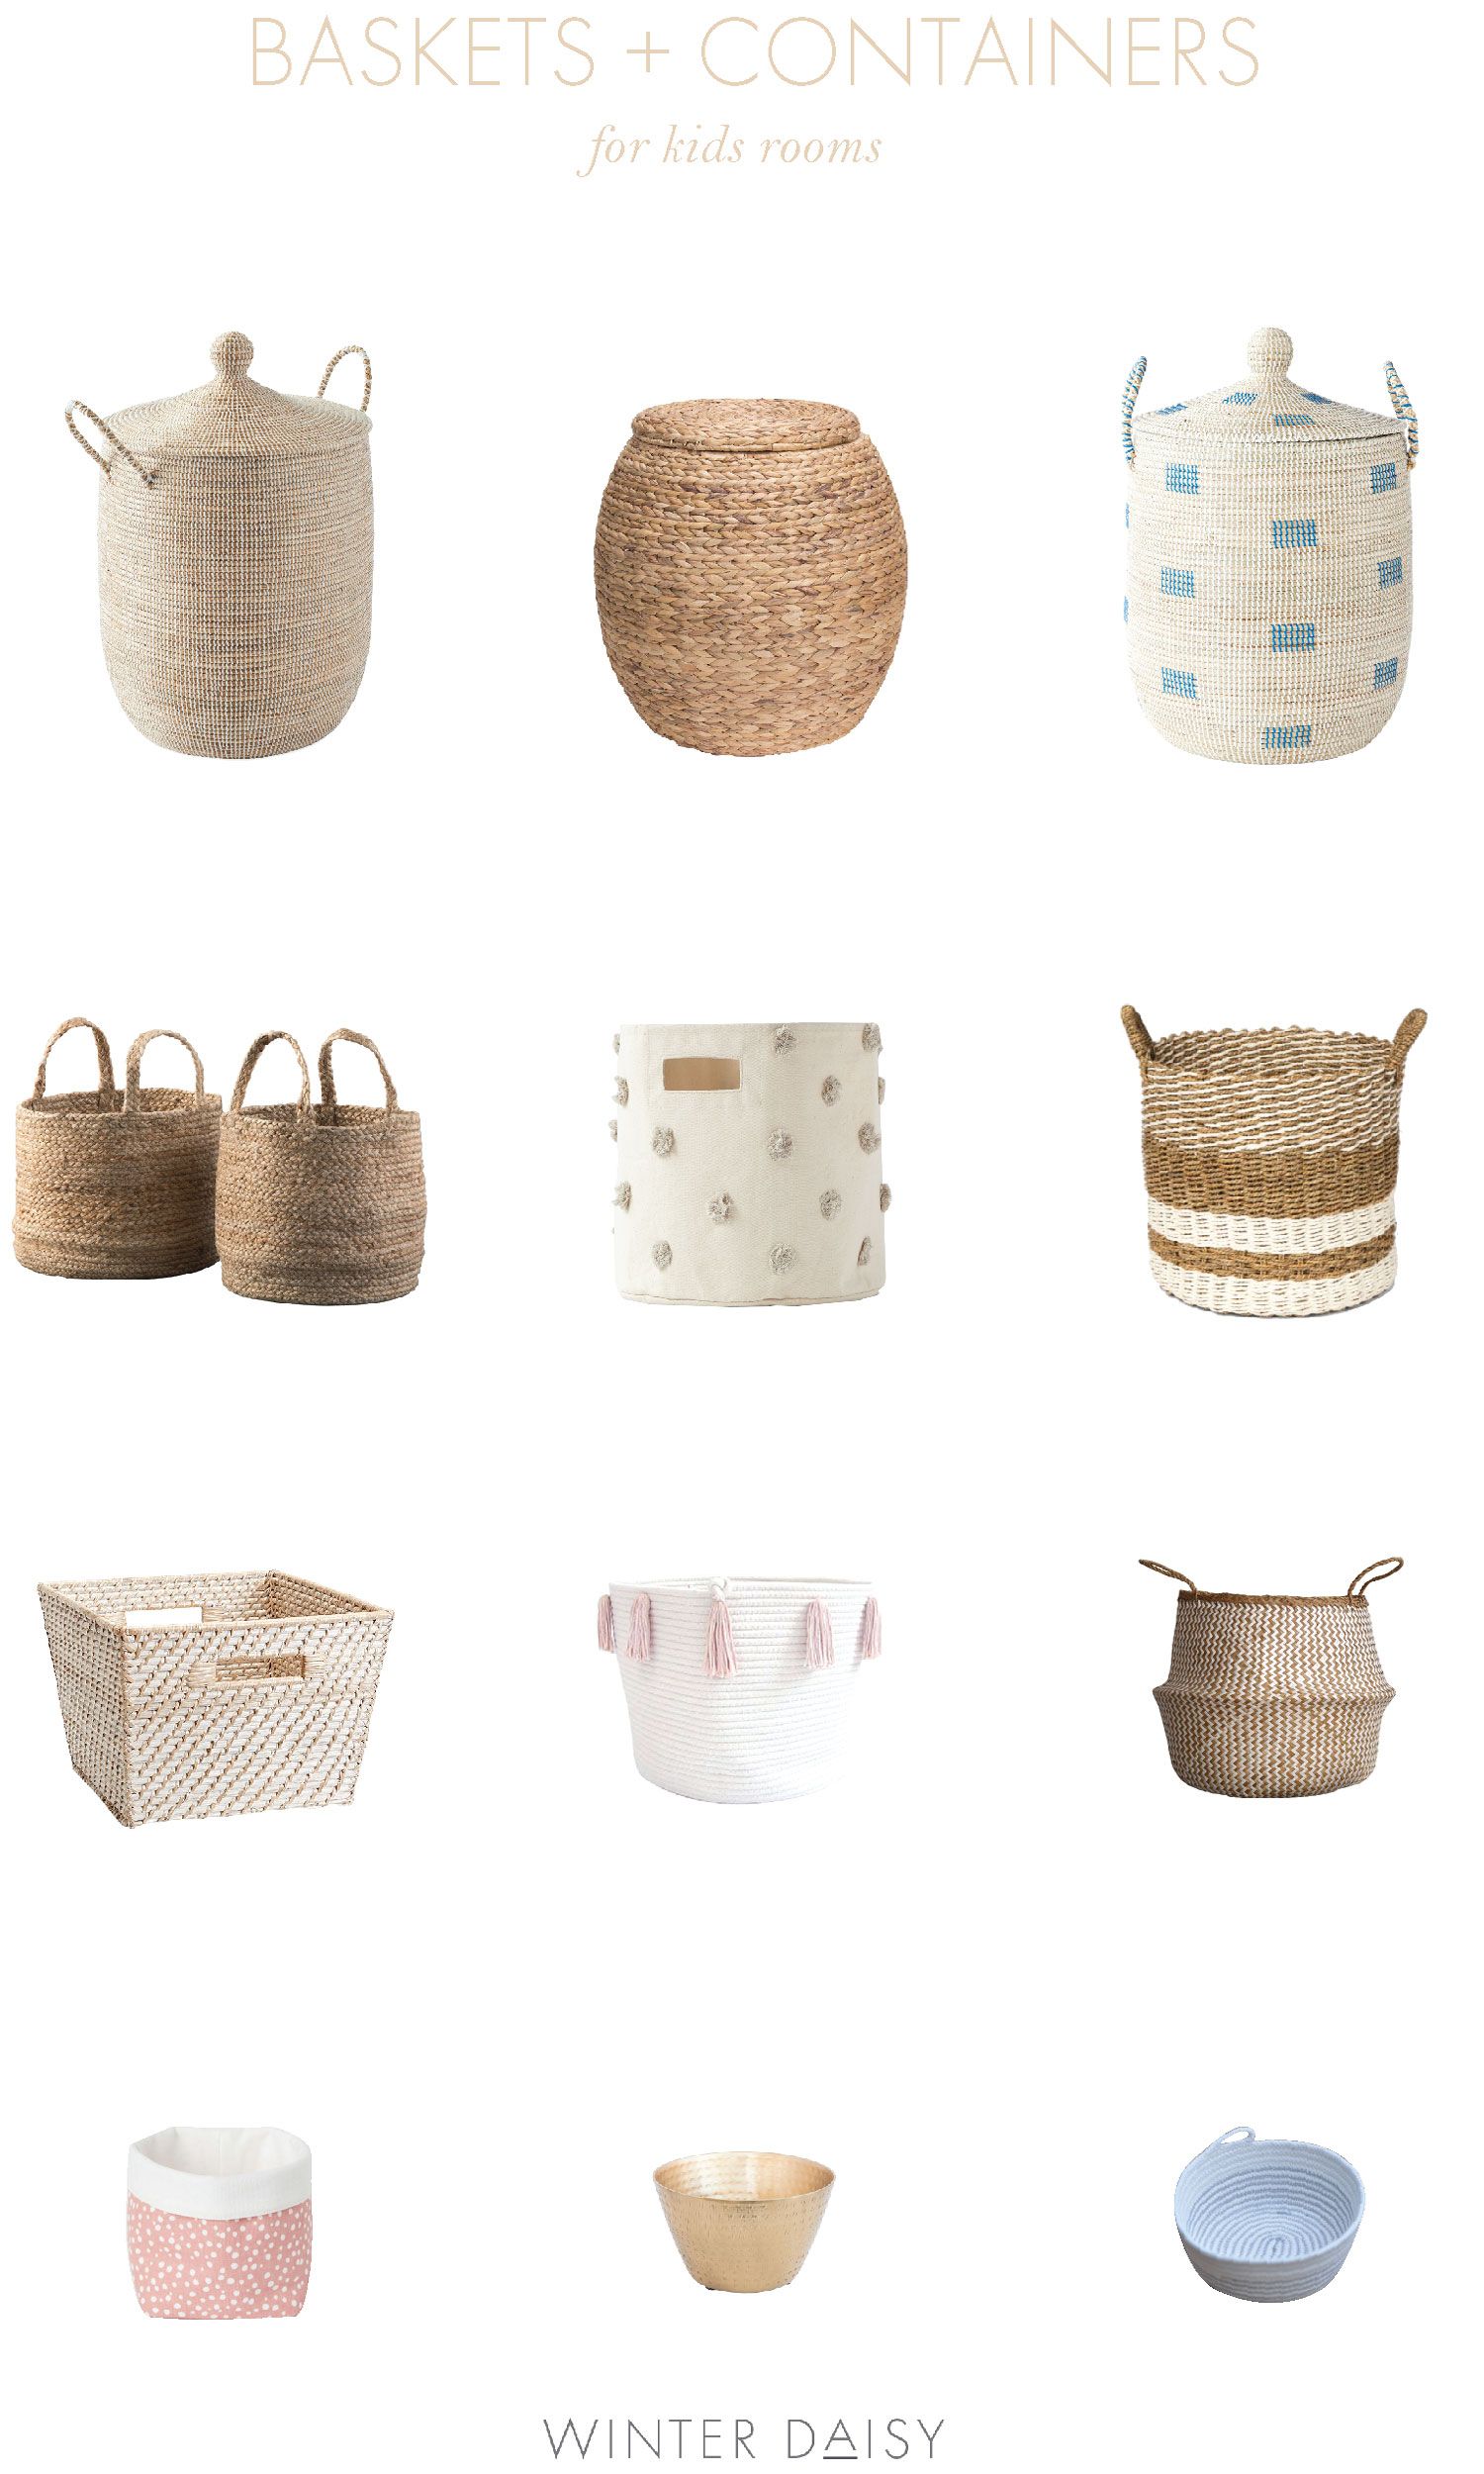 STORAGE BASKETS + CONTAINERS FOR KIDS SPACES — WINTER DAISY interiors for children